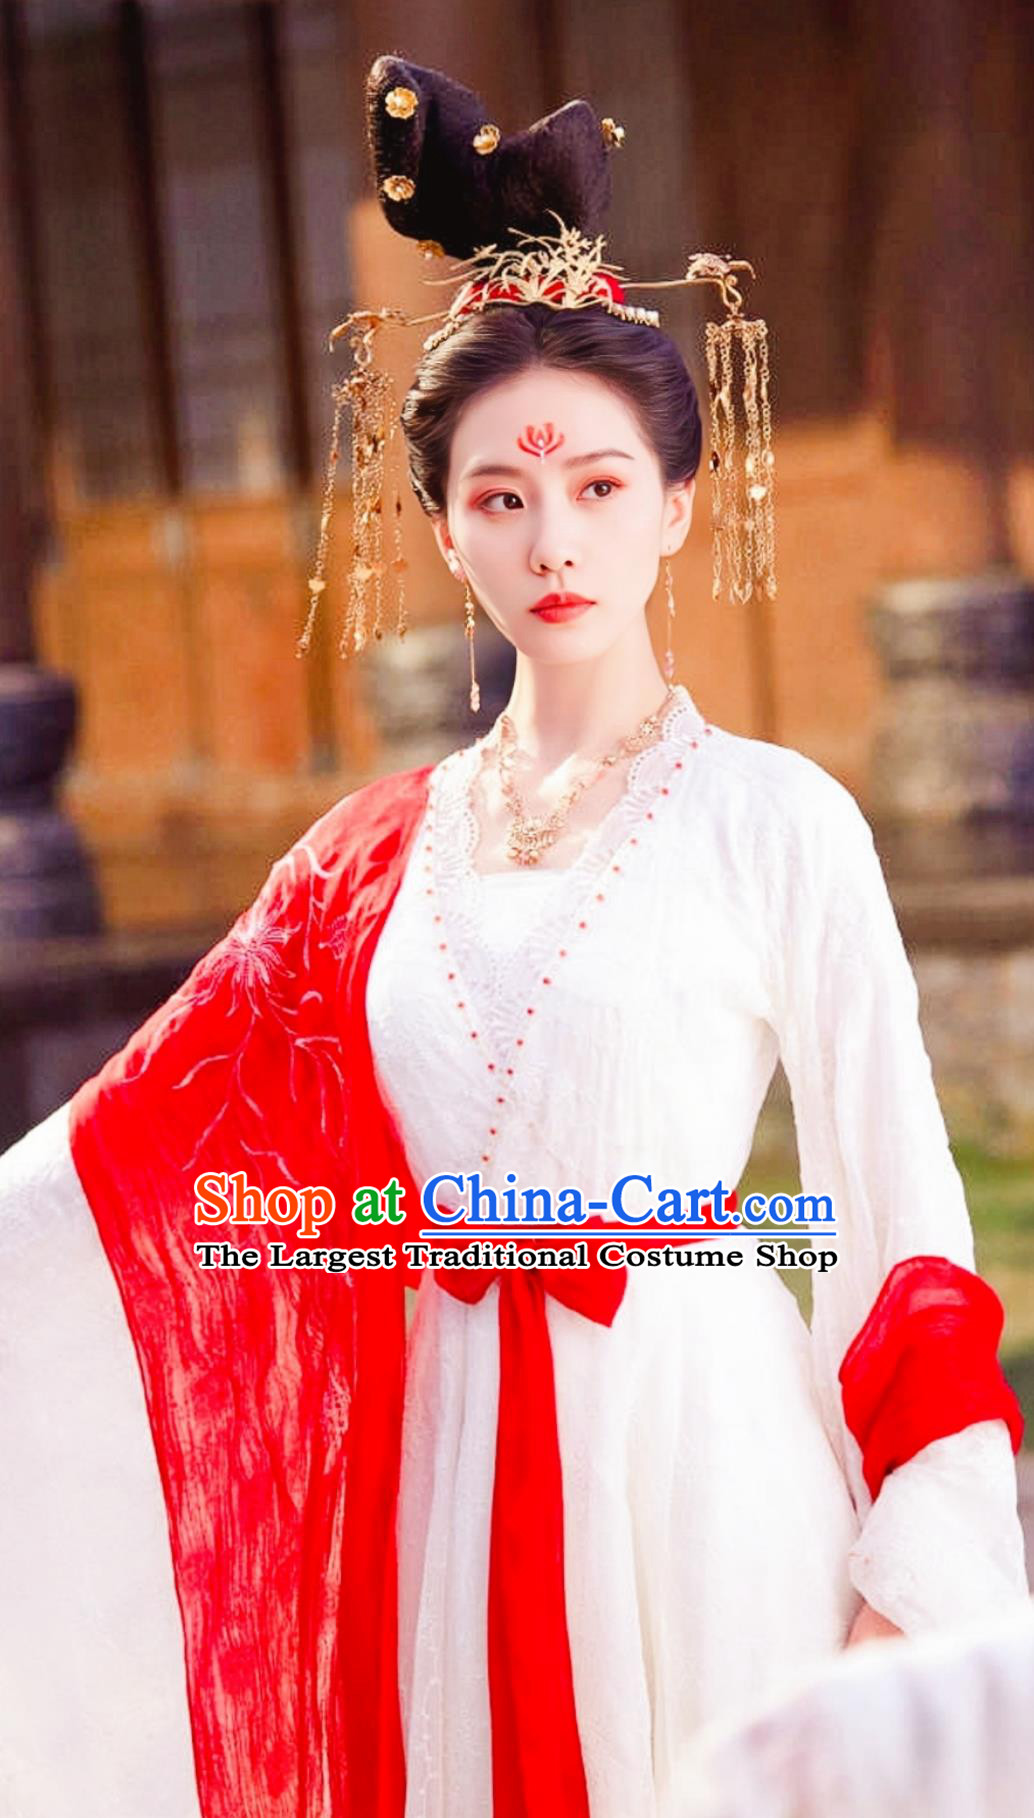 Ancient China Tang Dynasty Dance Lady Costume  Wuxia TV Series A Journey To Love Ren Ru Yi White Dress